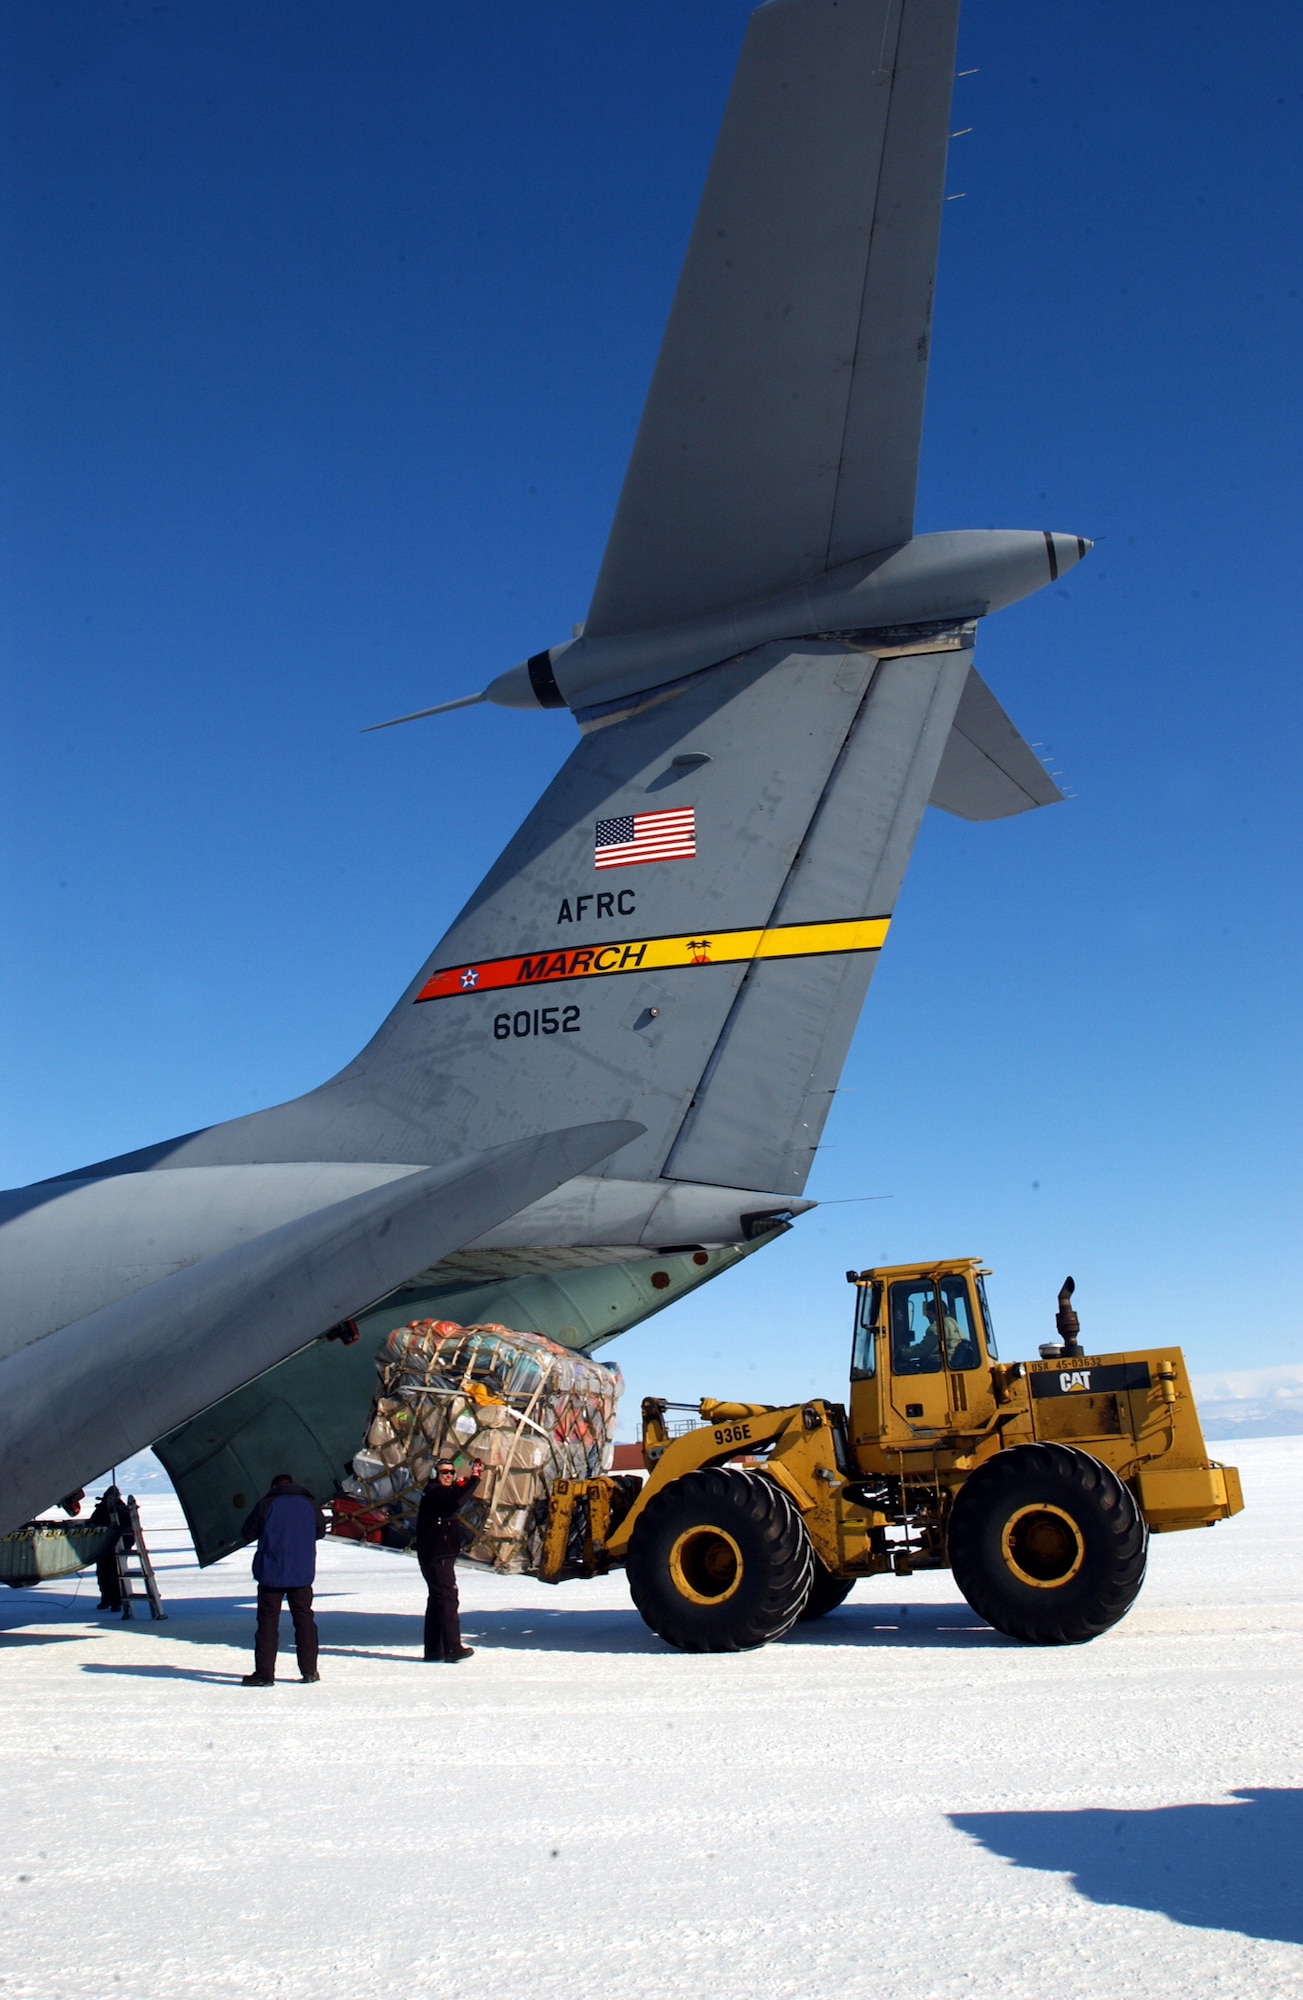 MCMURDO STATION, Antarctica -- Cargo is unloaded from a C-141 Starlifter from March Air Reserve Base, Calif., on the ice runway near here.  The crews and aircraft were flying the last Air Force Reserve mission to Antarctica supporting Operation Deep Freeze.  (U.S. Air Force photo by Tech. Sgt. Joe Zucarro)
                        